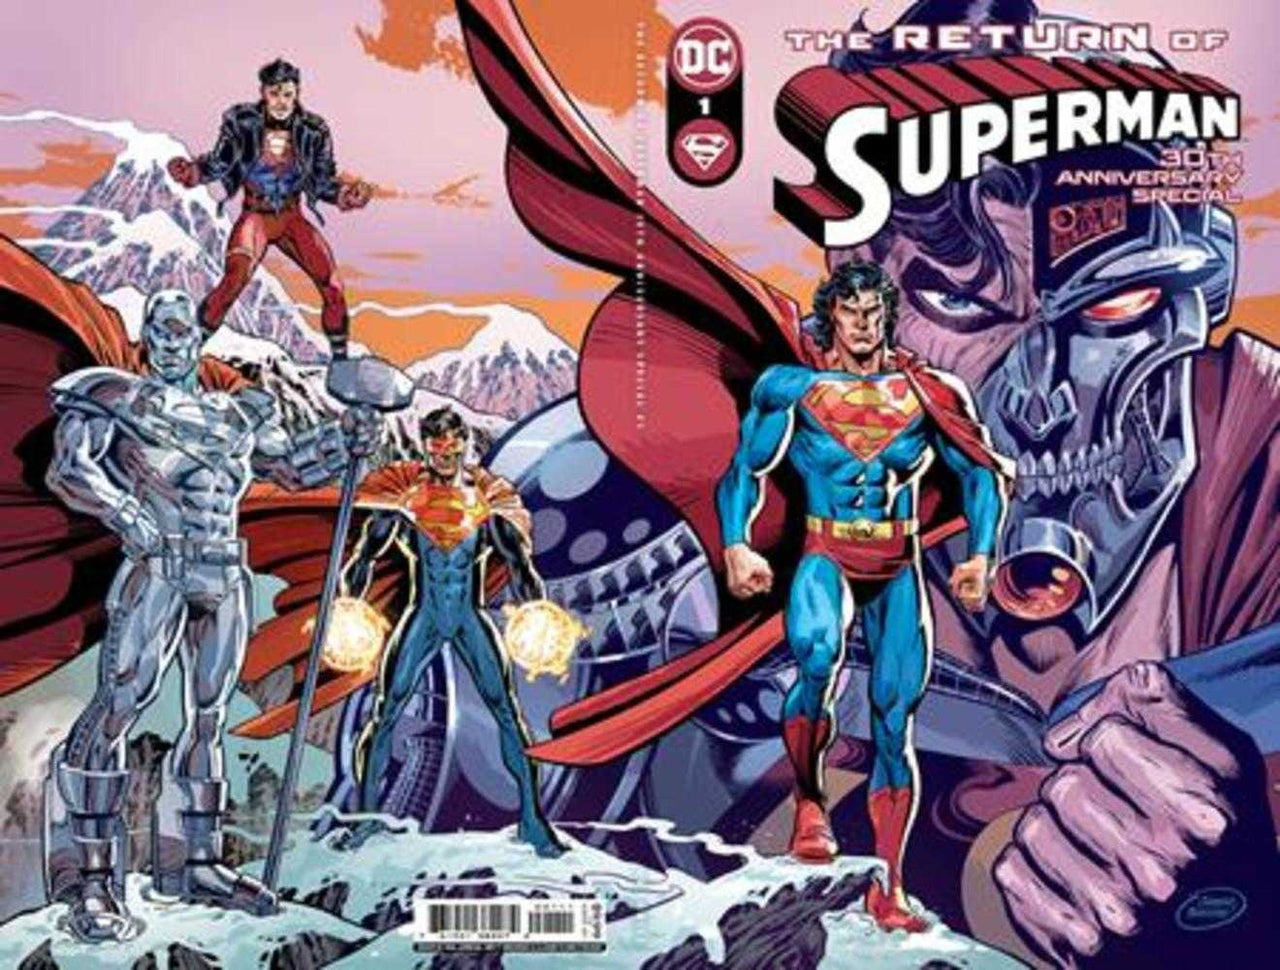 The Return Of Superman 30th Anniversary Special (2023) #1